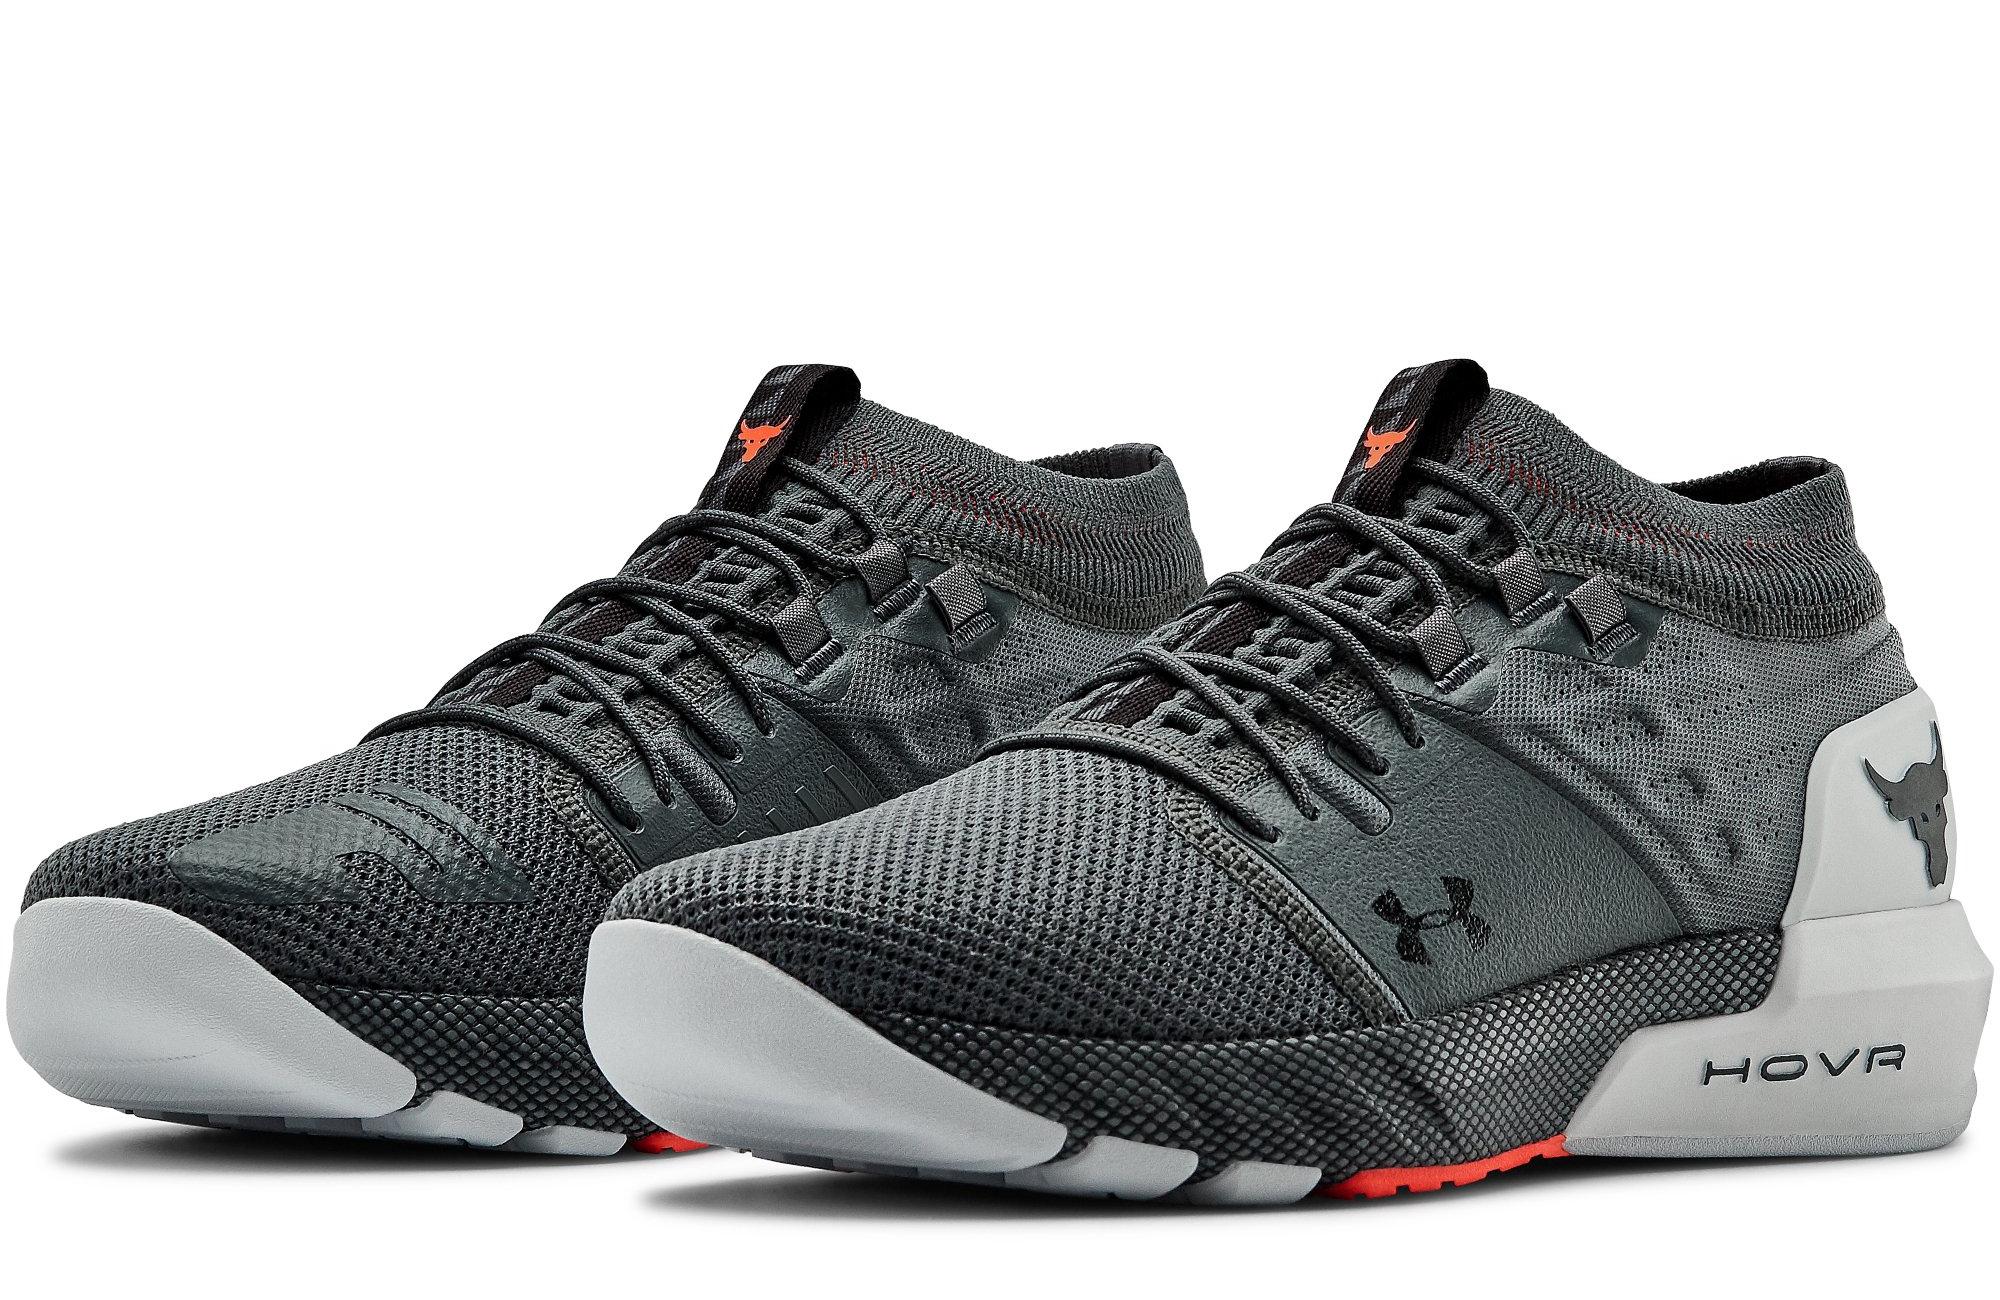 Sneakers Release – Under Armour Project Rock 2 “Grey/Red” Men’s and ...